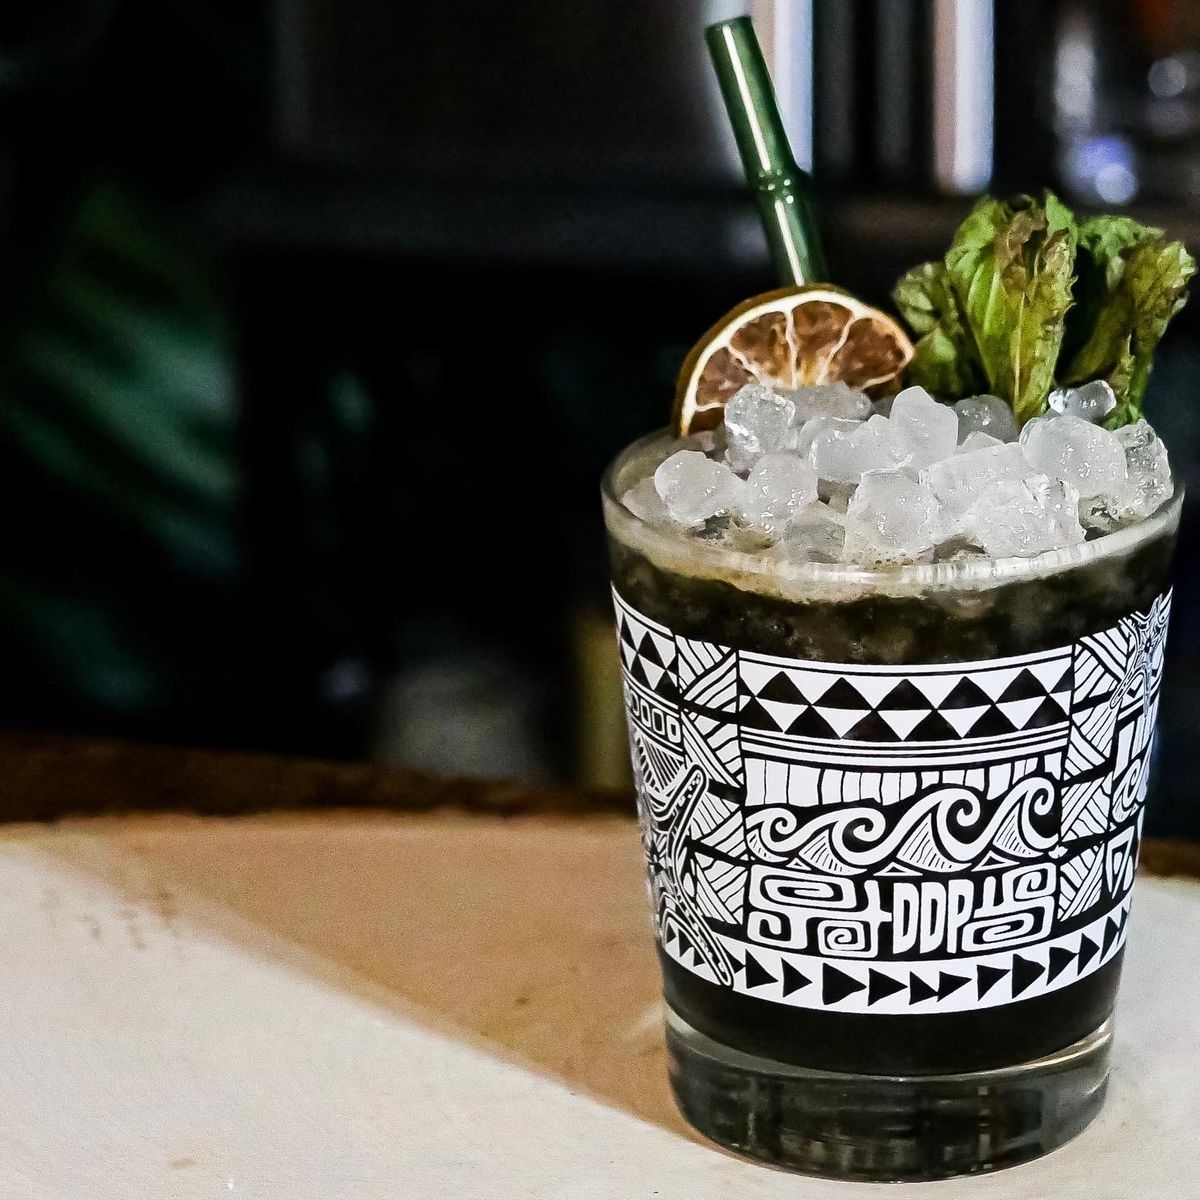 Time for another #maitaimonday! I feel like I haven't done one of these in a while, and with Halloween just a week away, seemed like a perfect time.  
 
There's nothing spookier than a black cocktail, so let's take a pretty traditional mai tai and make it black.  